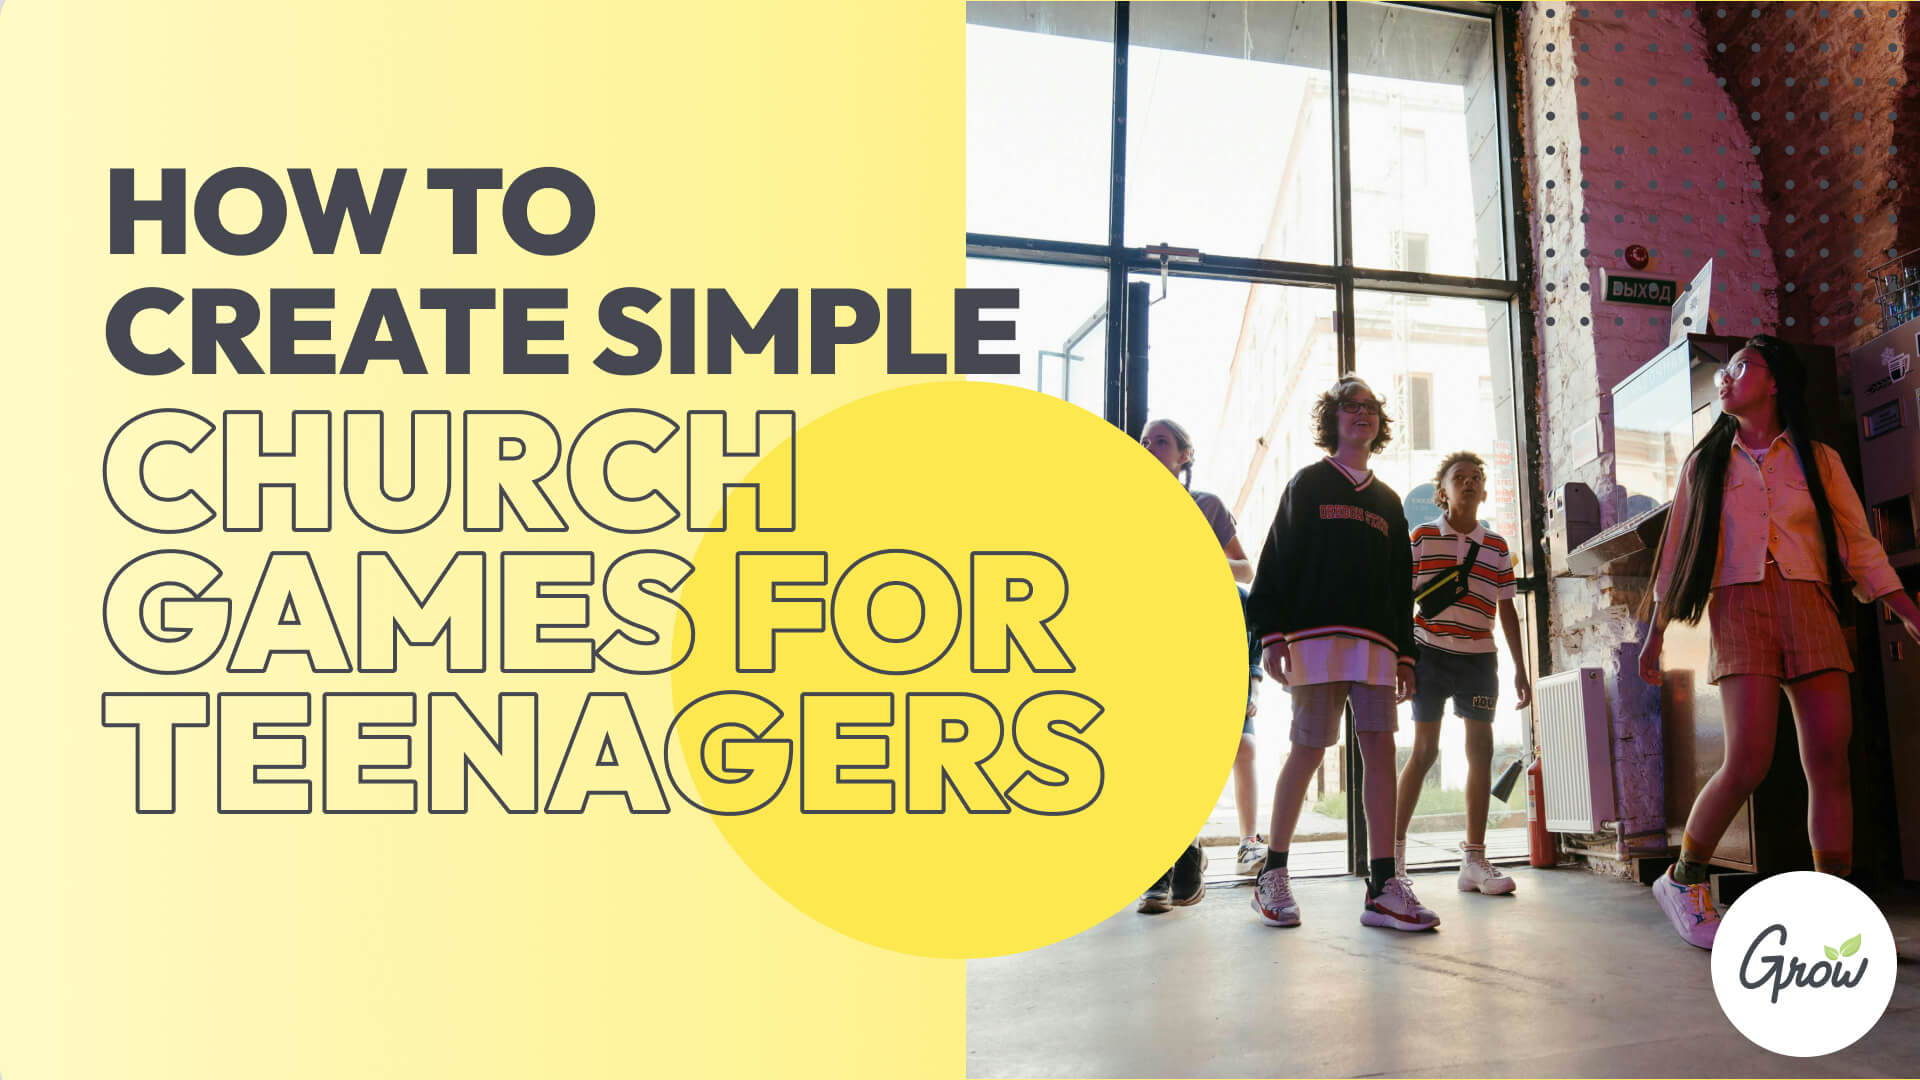 How to Create Simple Church Games for Teenagers